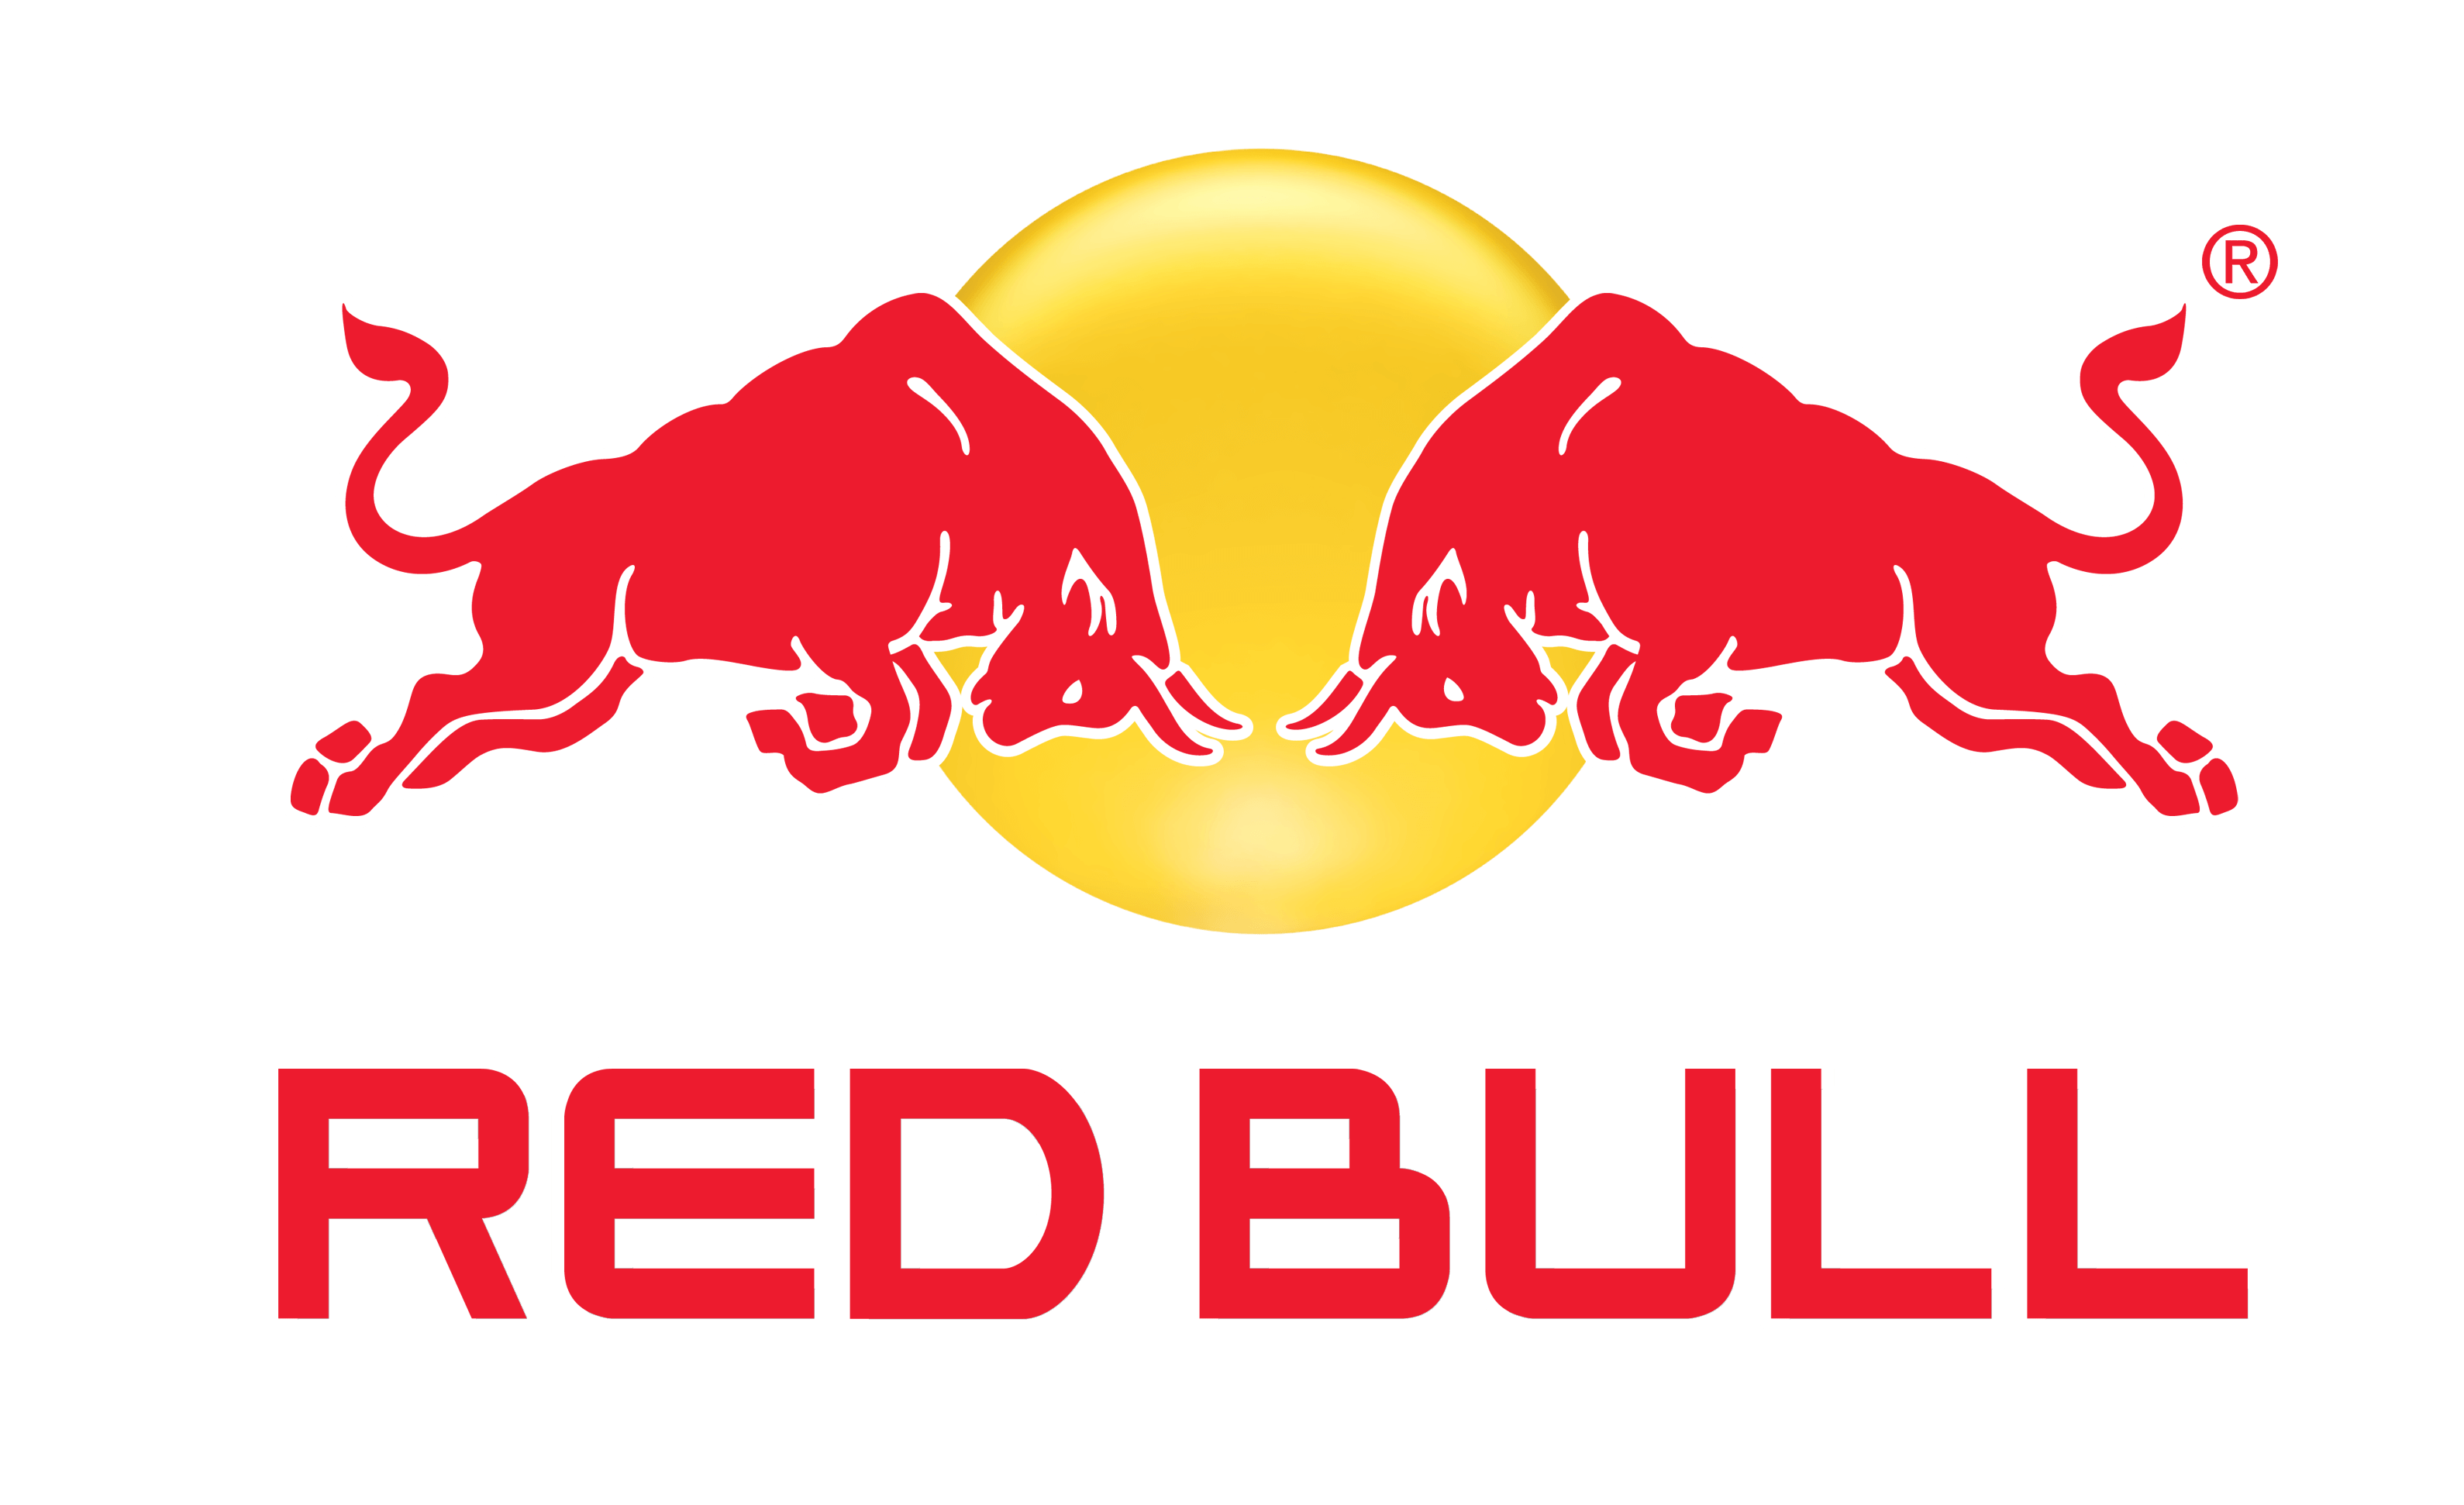 If I with Red Logo - Red Bull Logo PNG Transparent Background Download - DIY Logo Designs